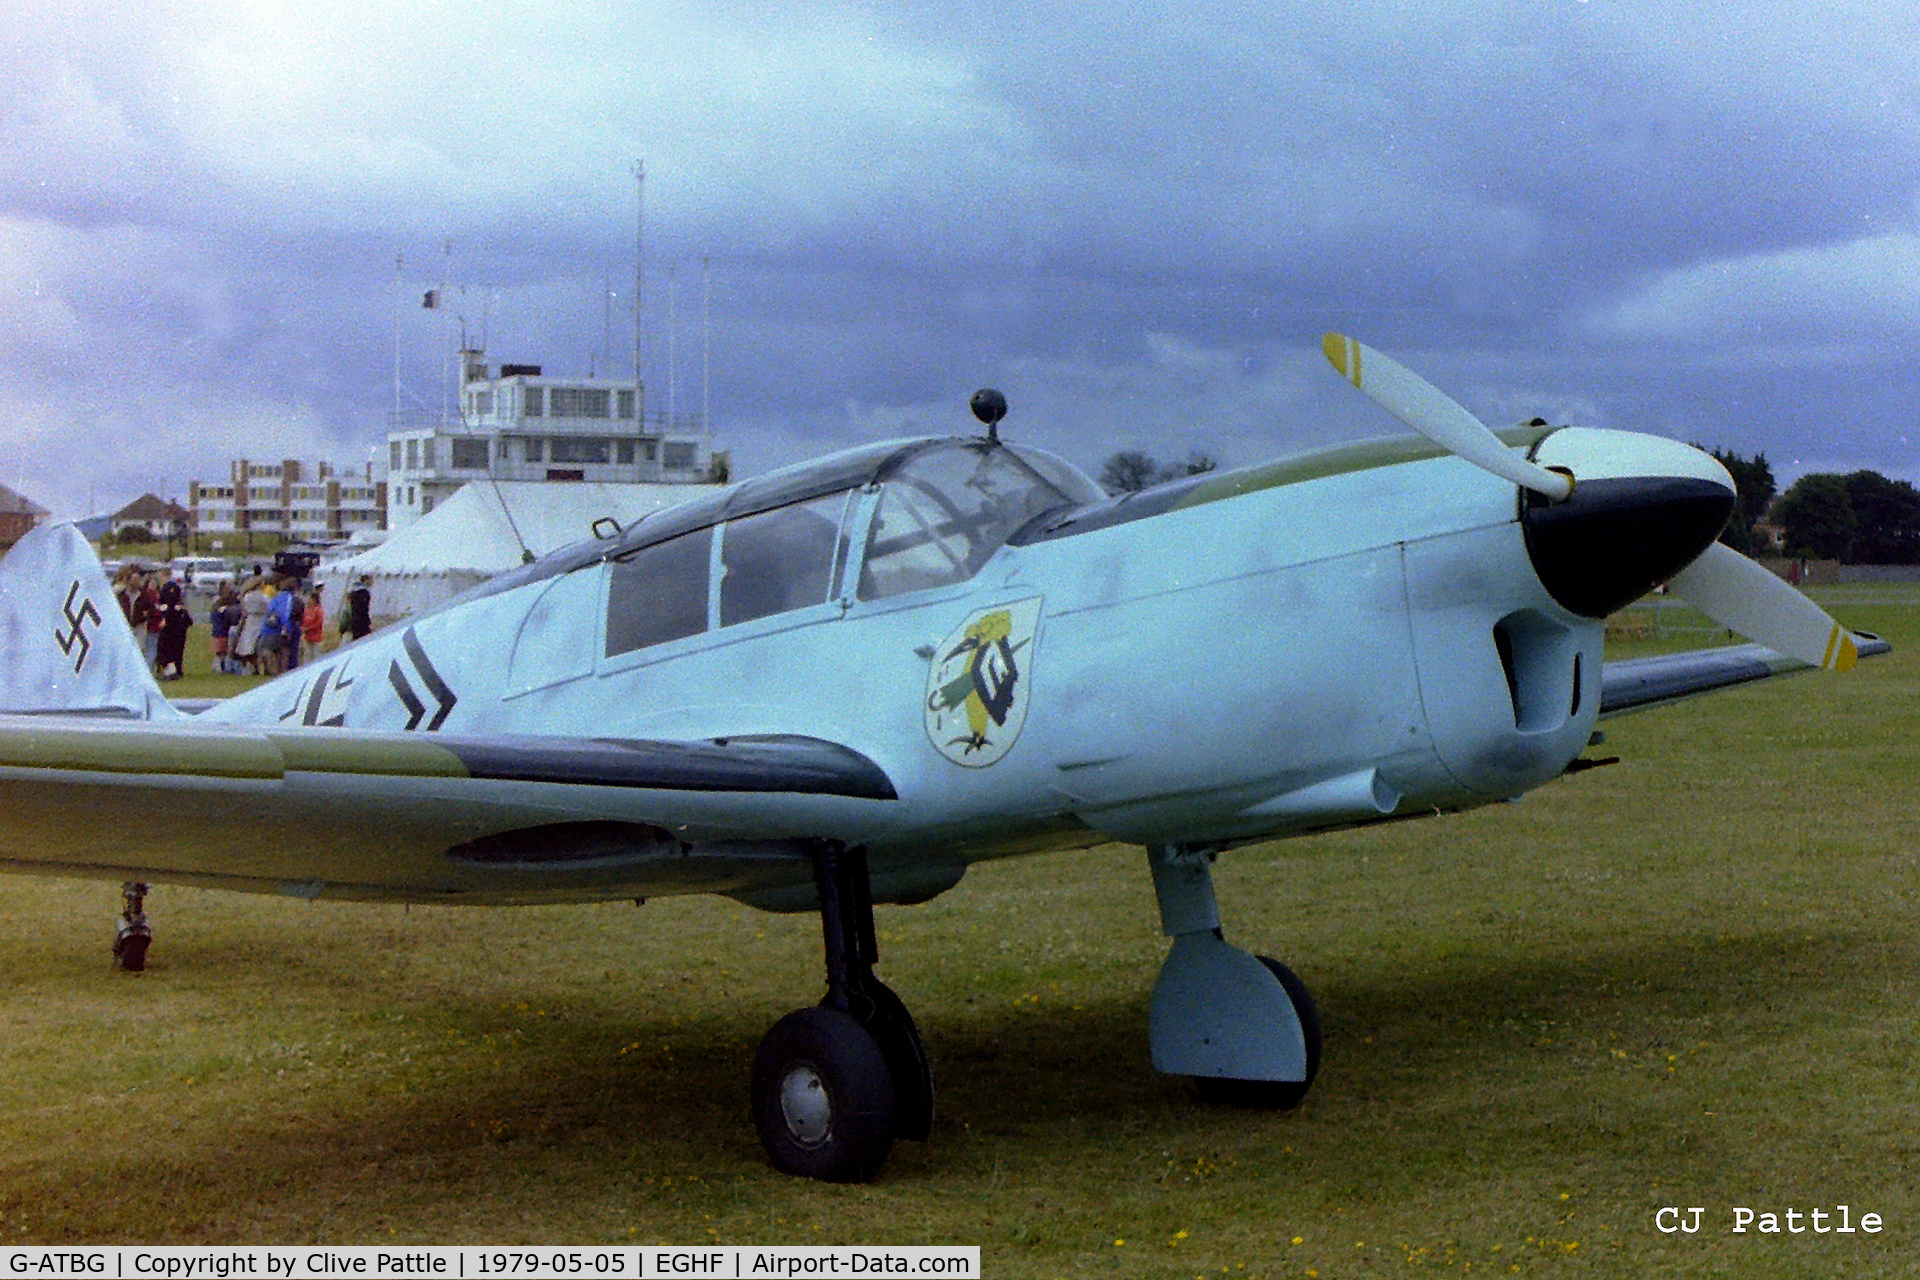 G-ATBG, 1945 Nord 1002 Pingouin II C/N 121, At the HMS Daedalus, RNAS Lee-on-Solent EGHF Air Show 1979. Pictured scanned from negative.